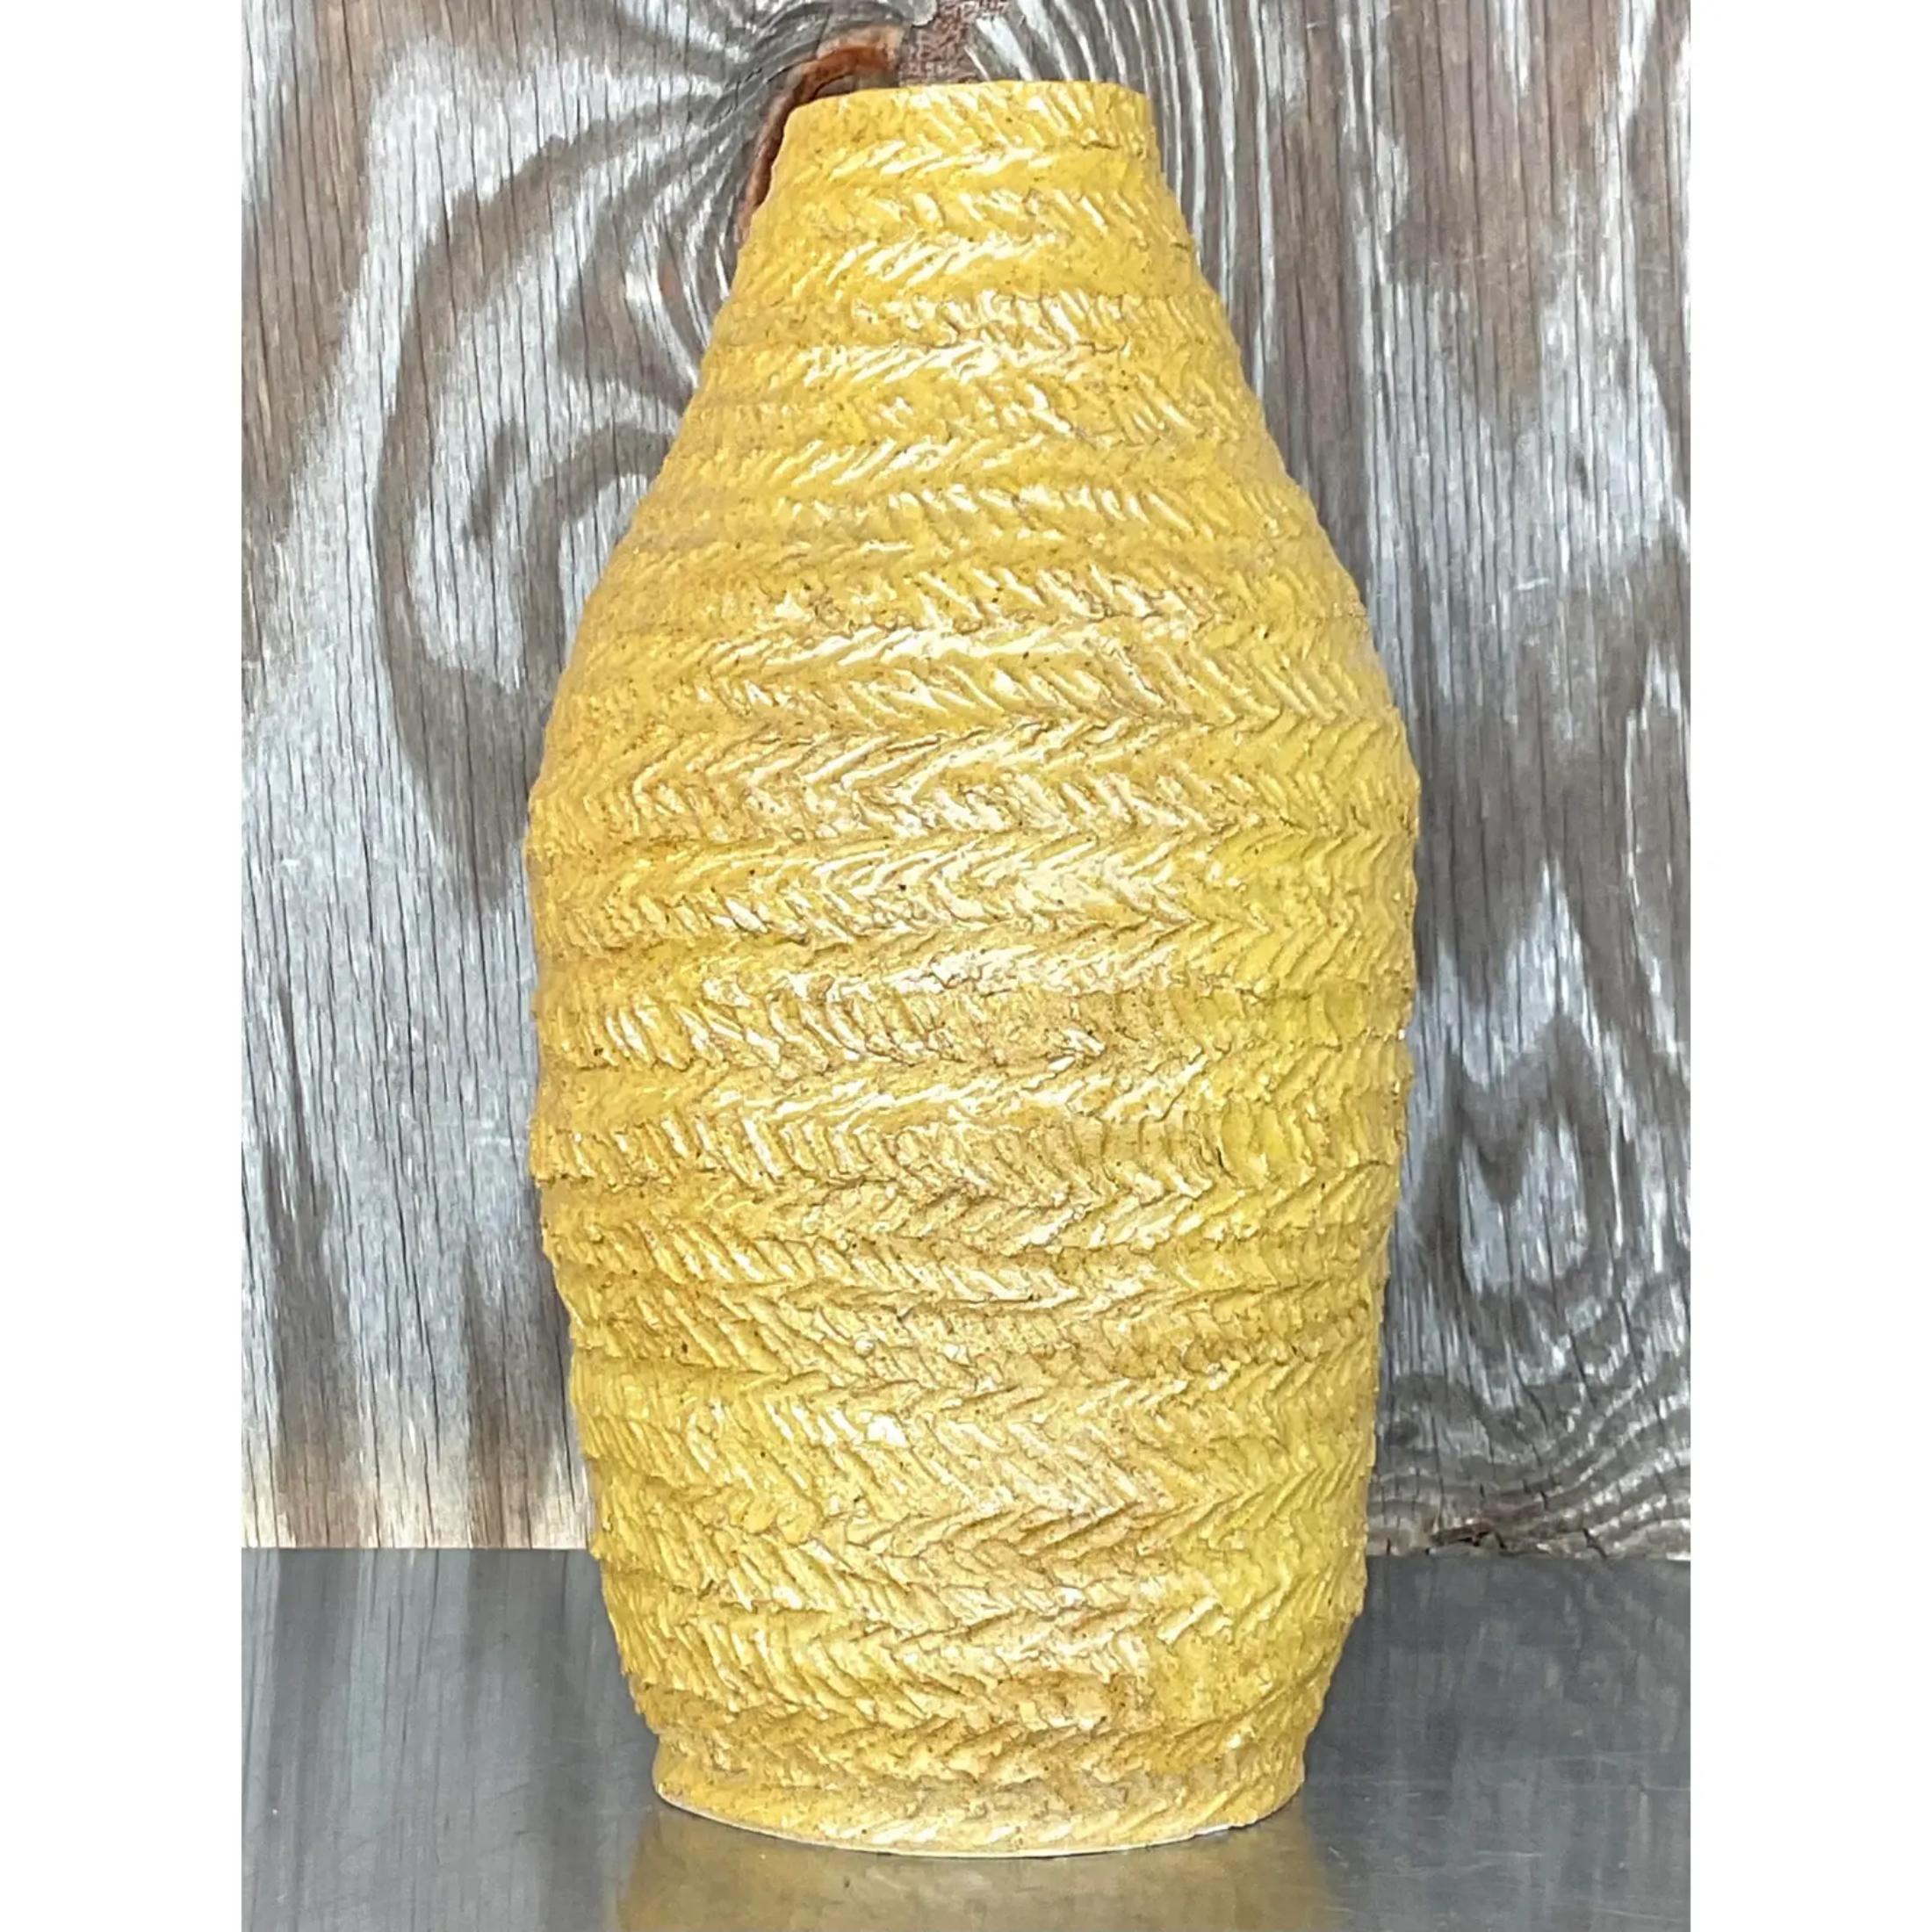 Fabulous vintage signed studio pottery vase. Beautiful textured finish in a chic mustard gold. Acquired from a Palm Beach estate.